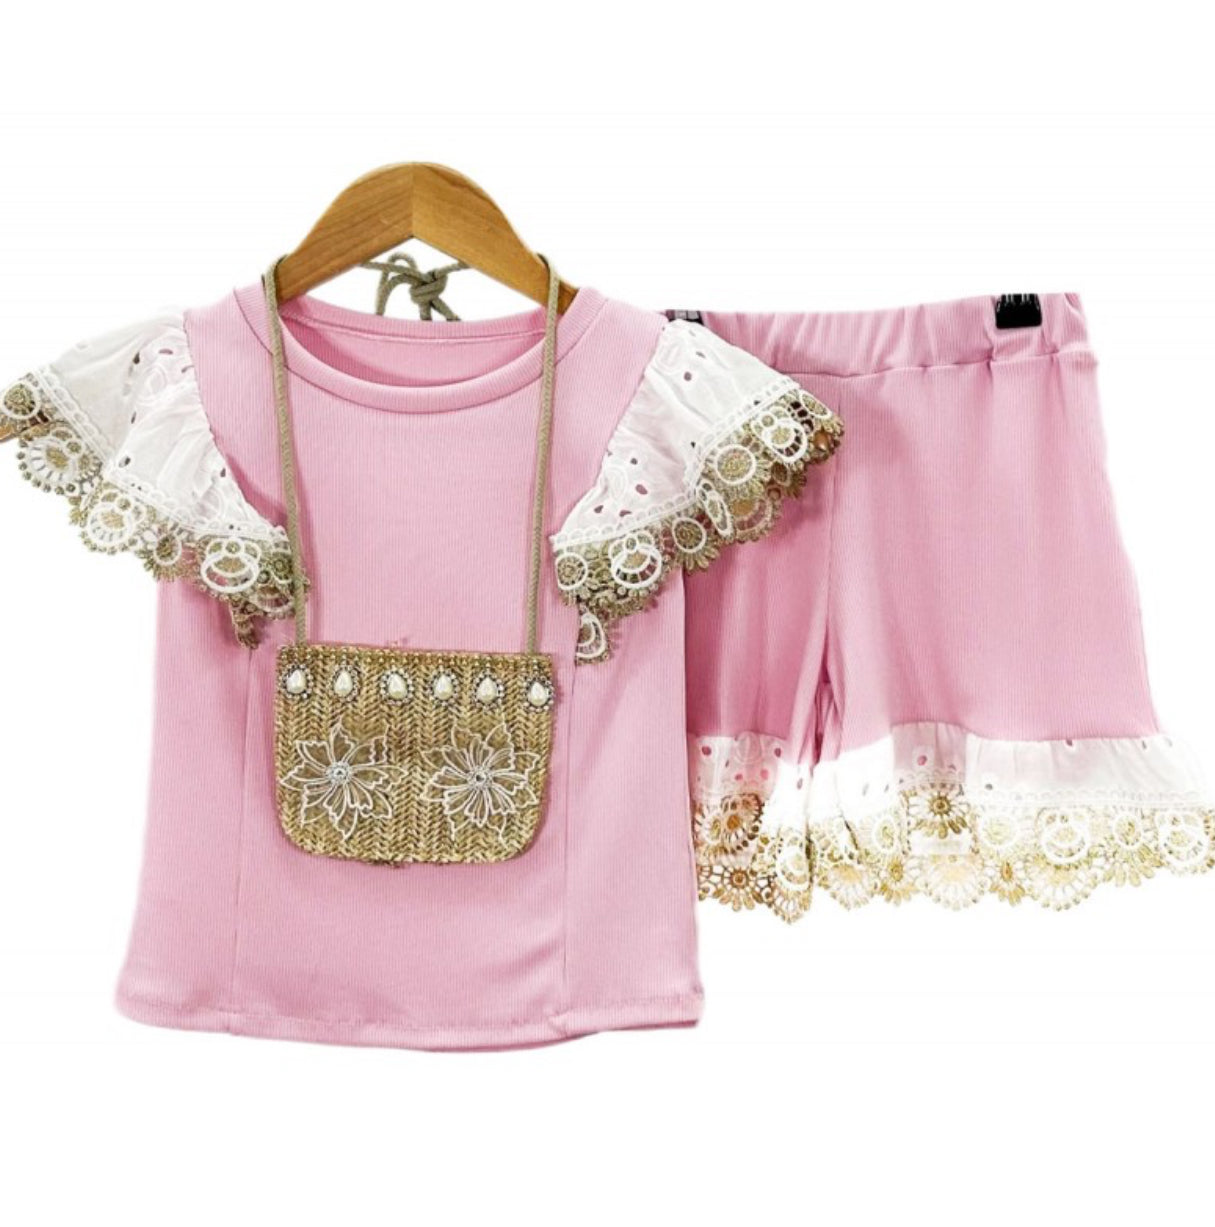 Girls Lula Pink Embroidered Shorts Set with bag